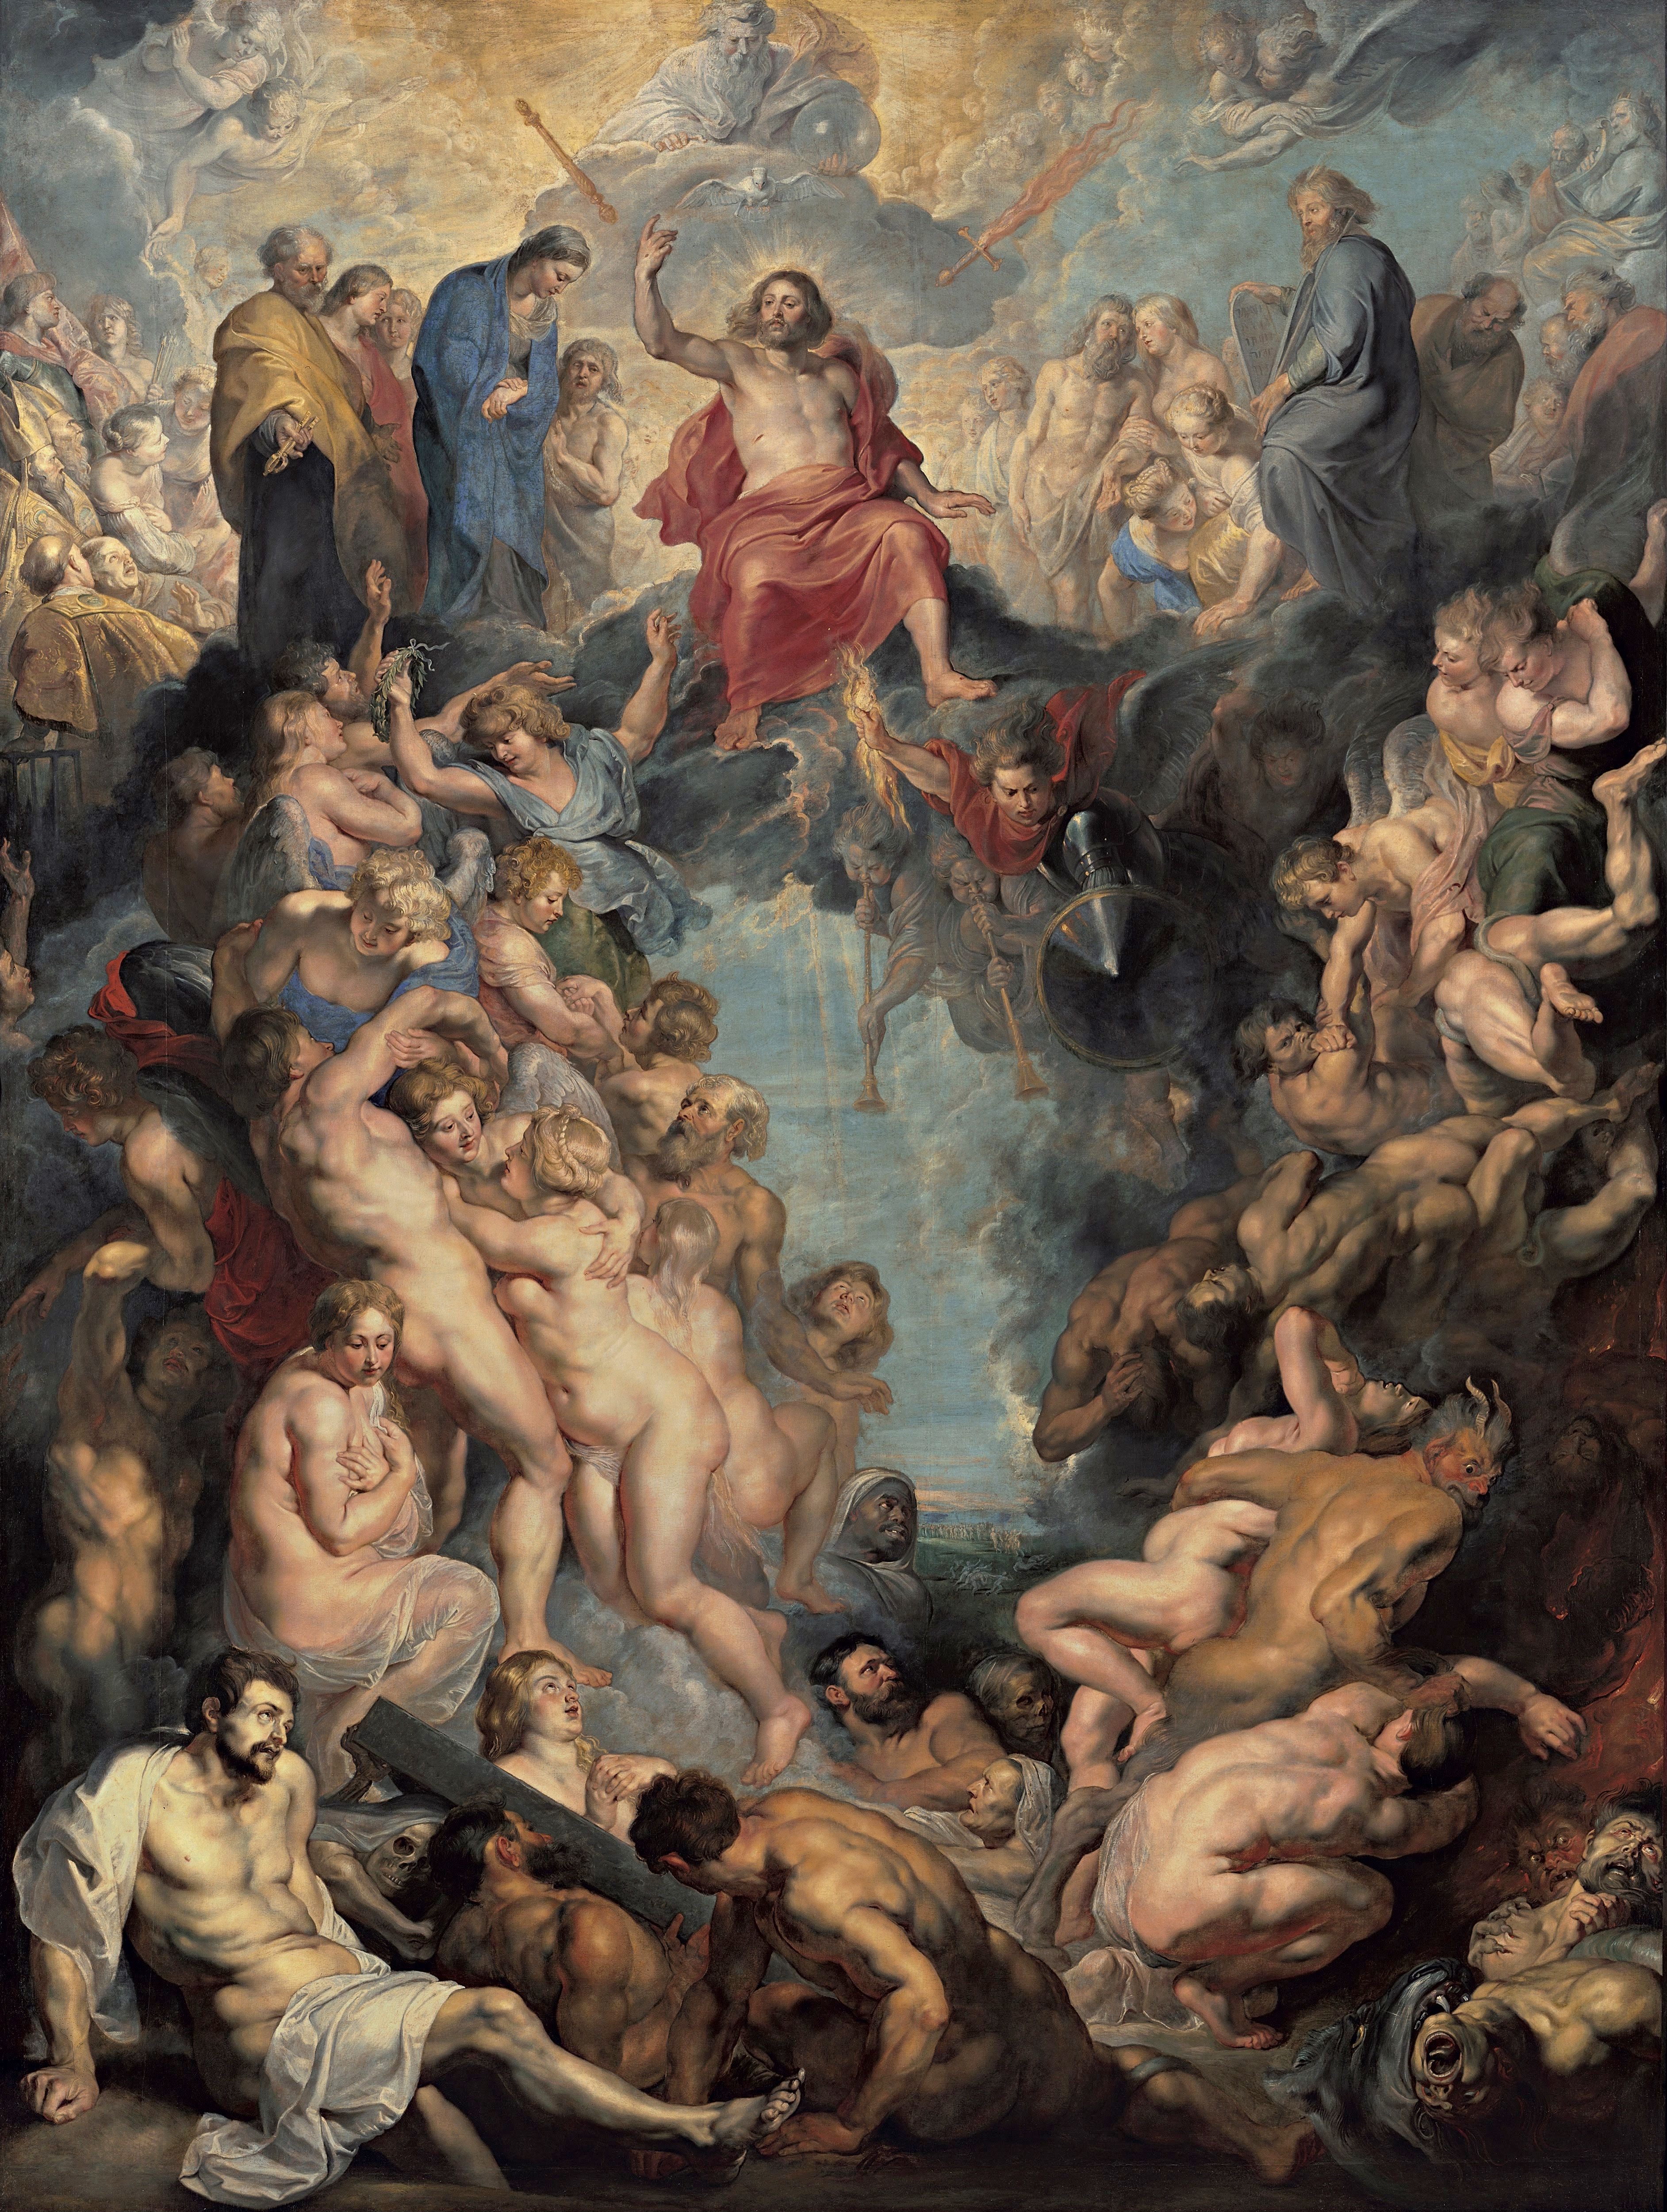 "The Great Last Judgement" by Peter Paul Rubens.